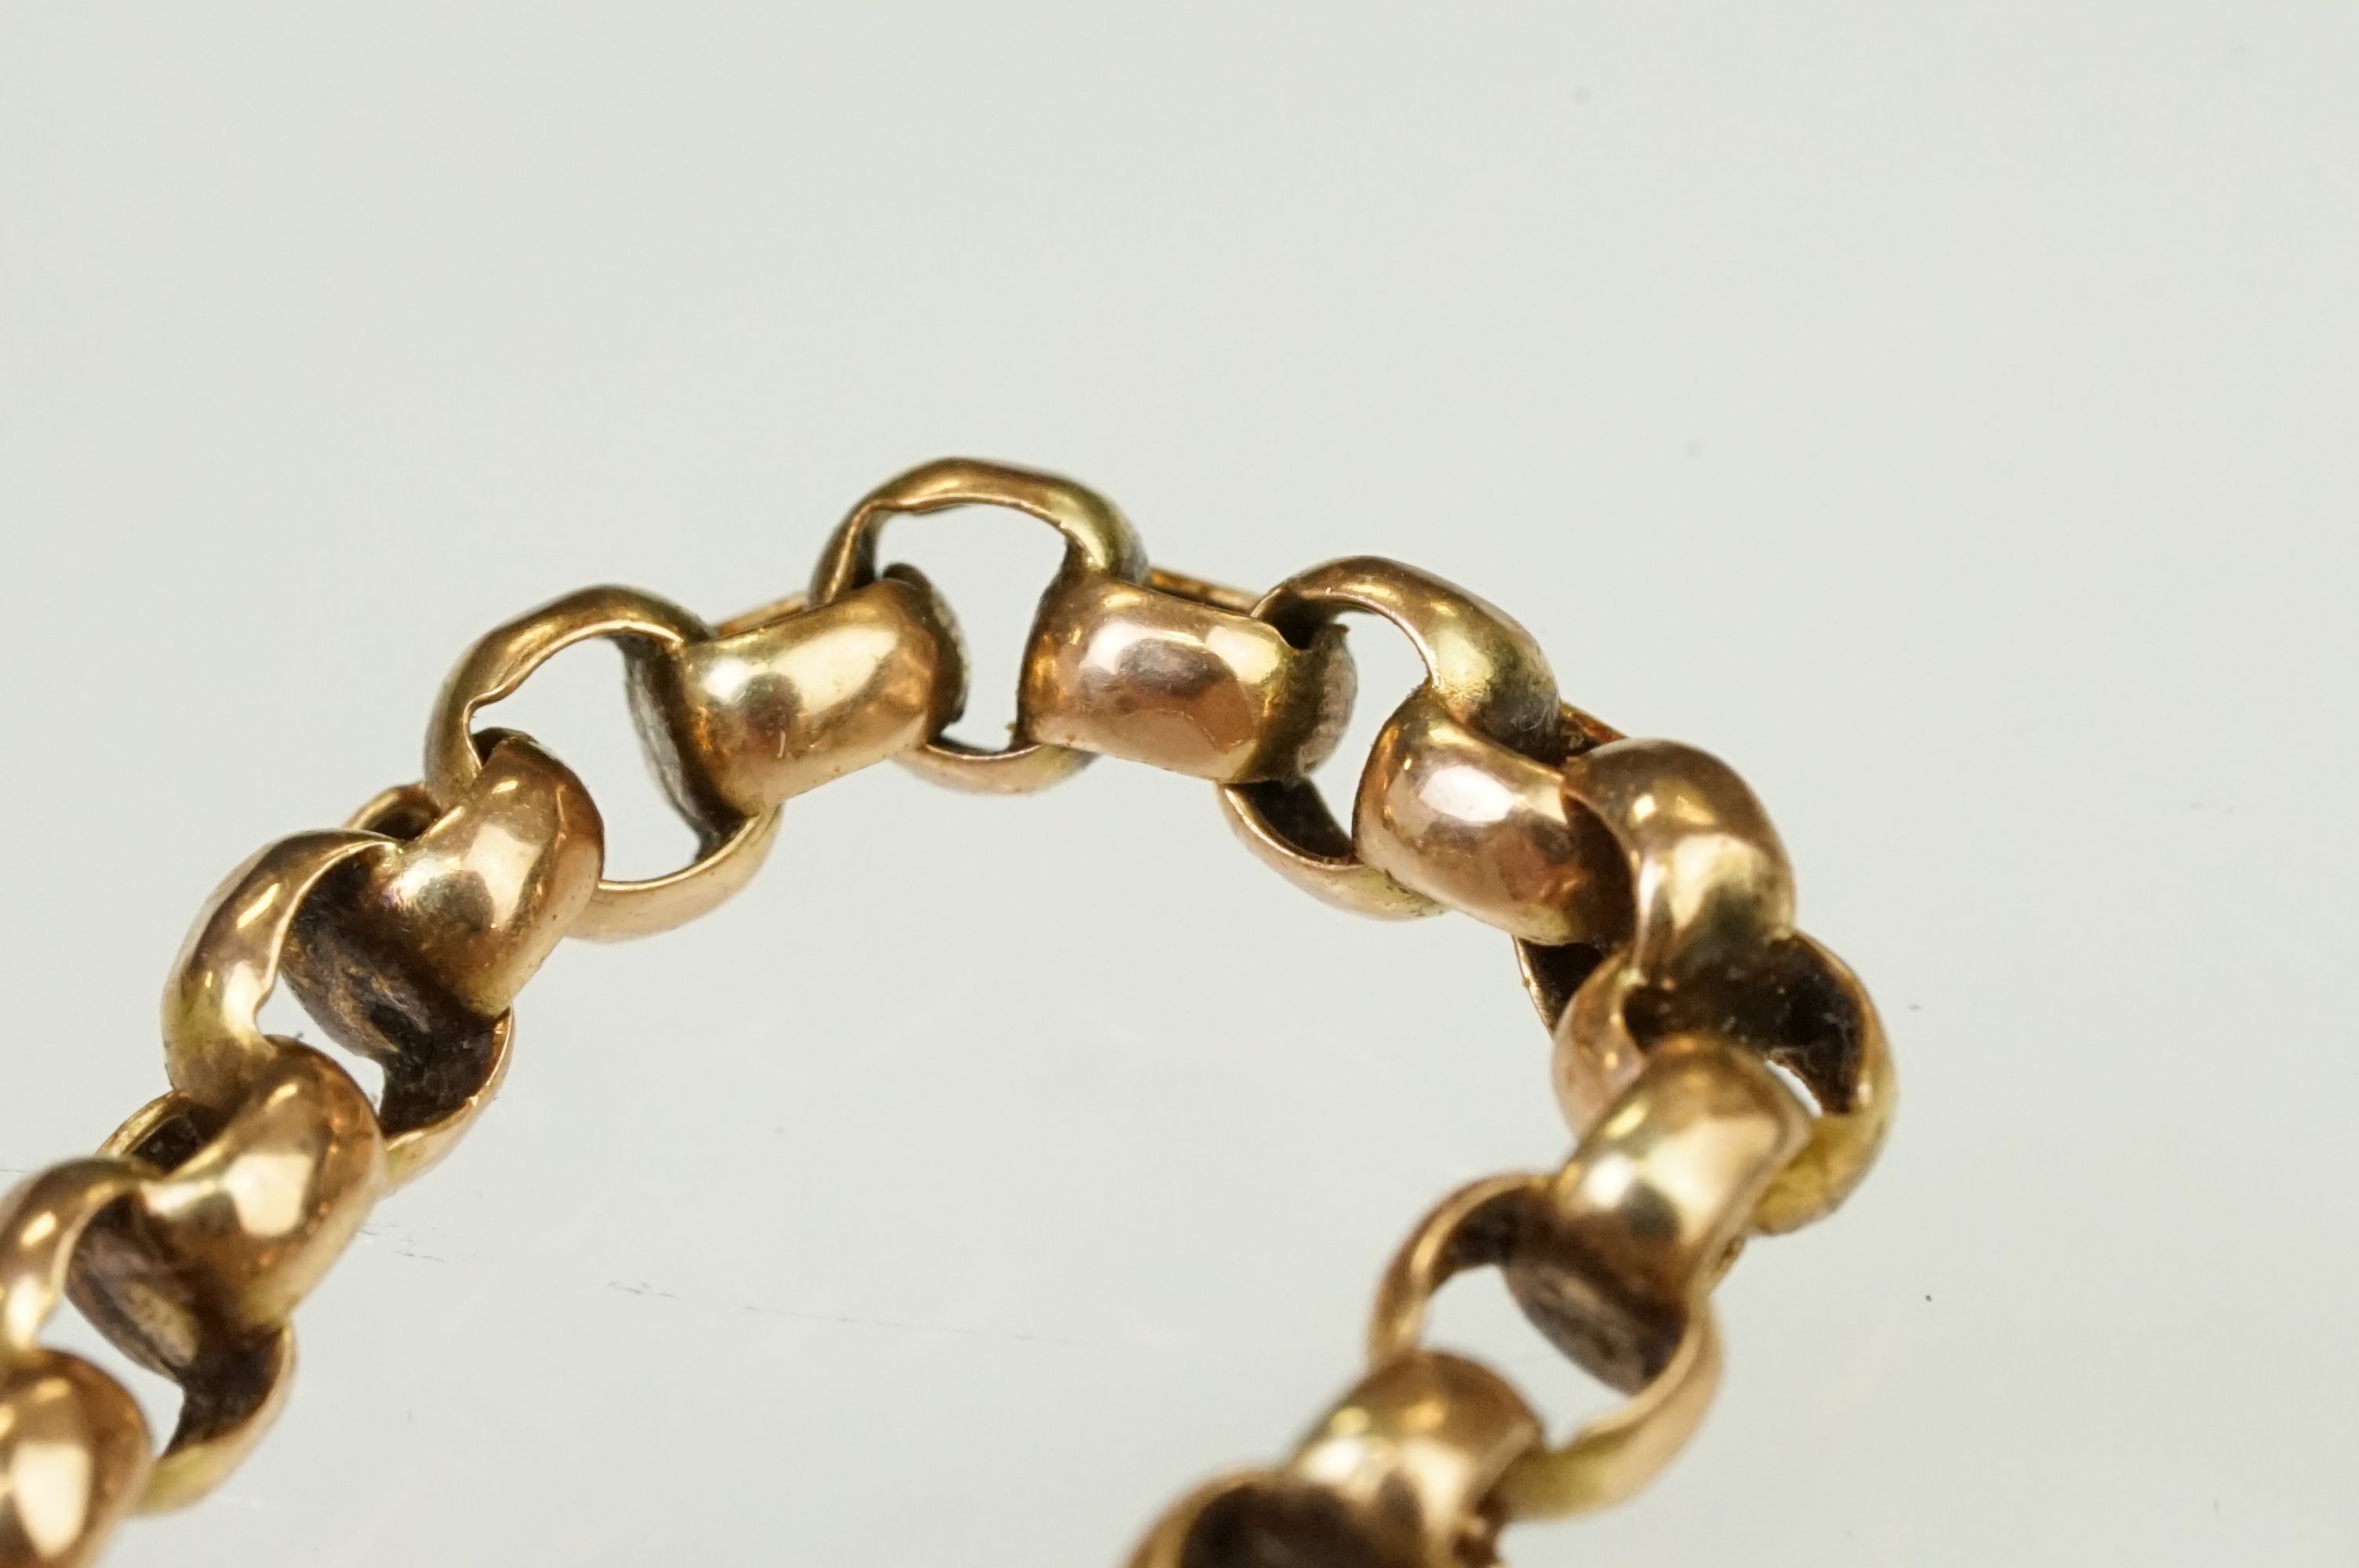 Early 20th Century antique 9ct gold belcher link necklace chain with cylinder clasp. Marked 9ct to - Image 3 of 5